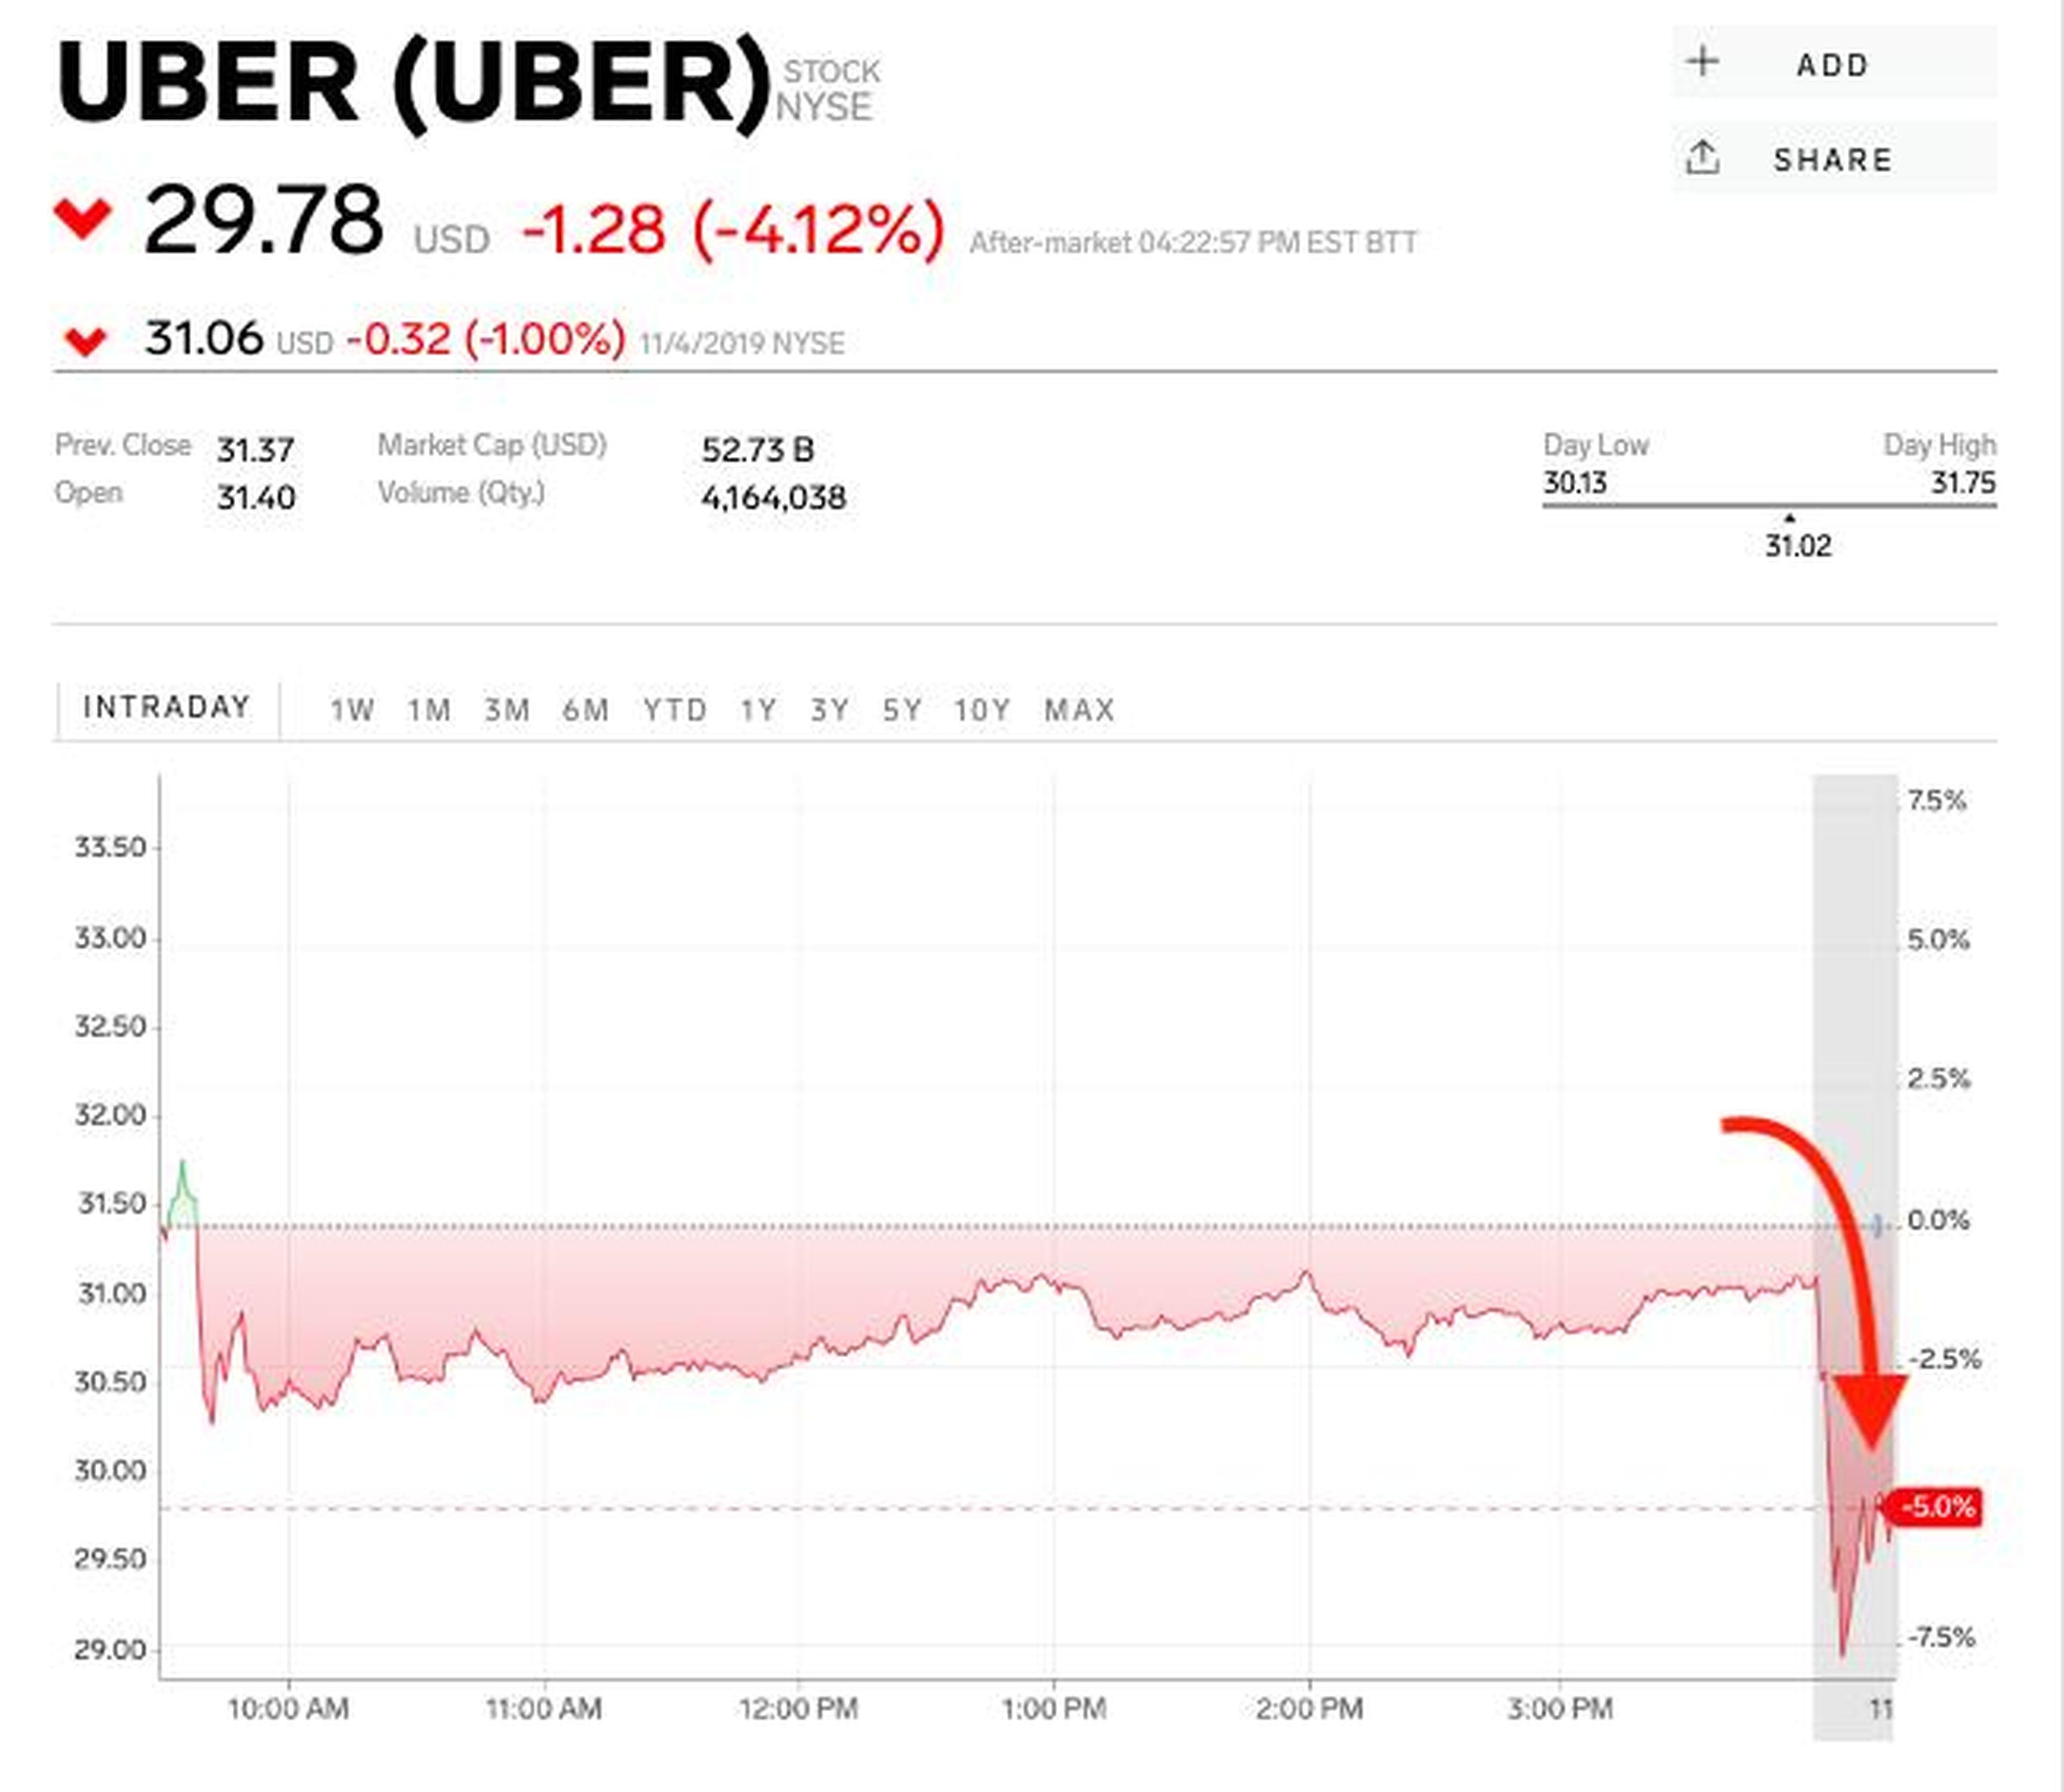 Uber losses keep growing as the ride-hailing giant scrambles to get its finances in order